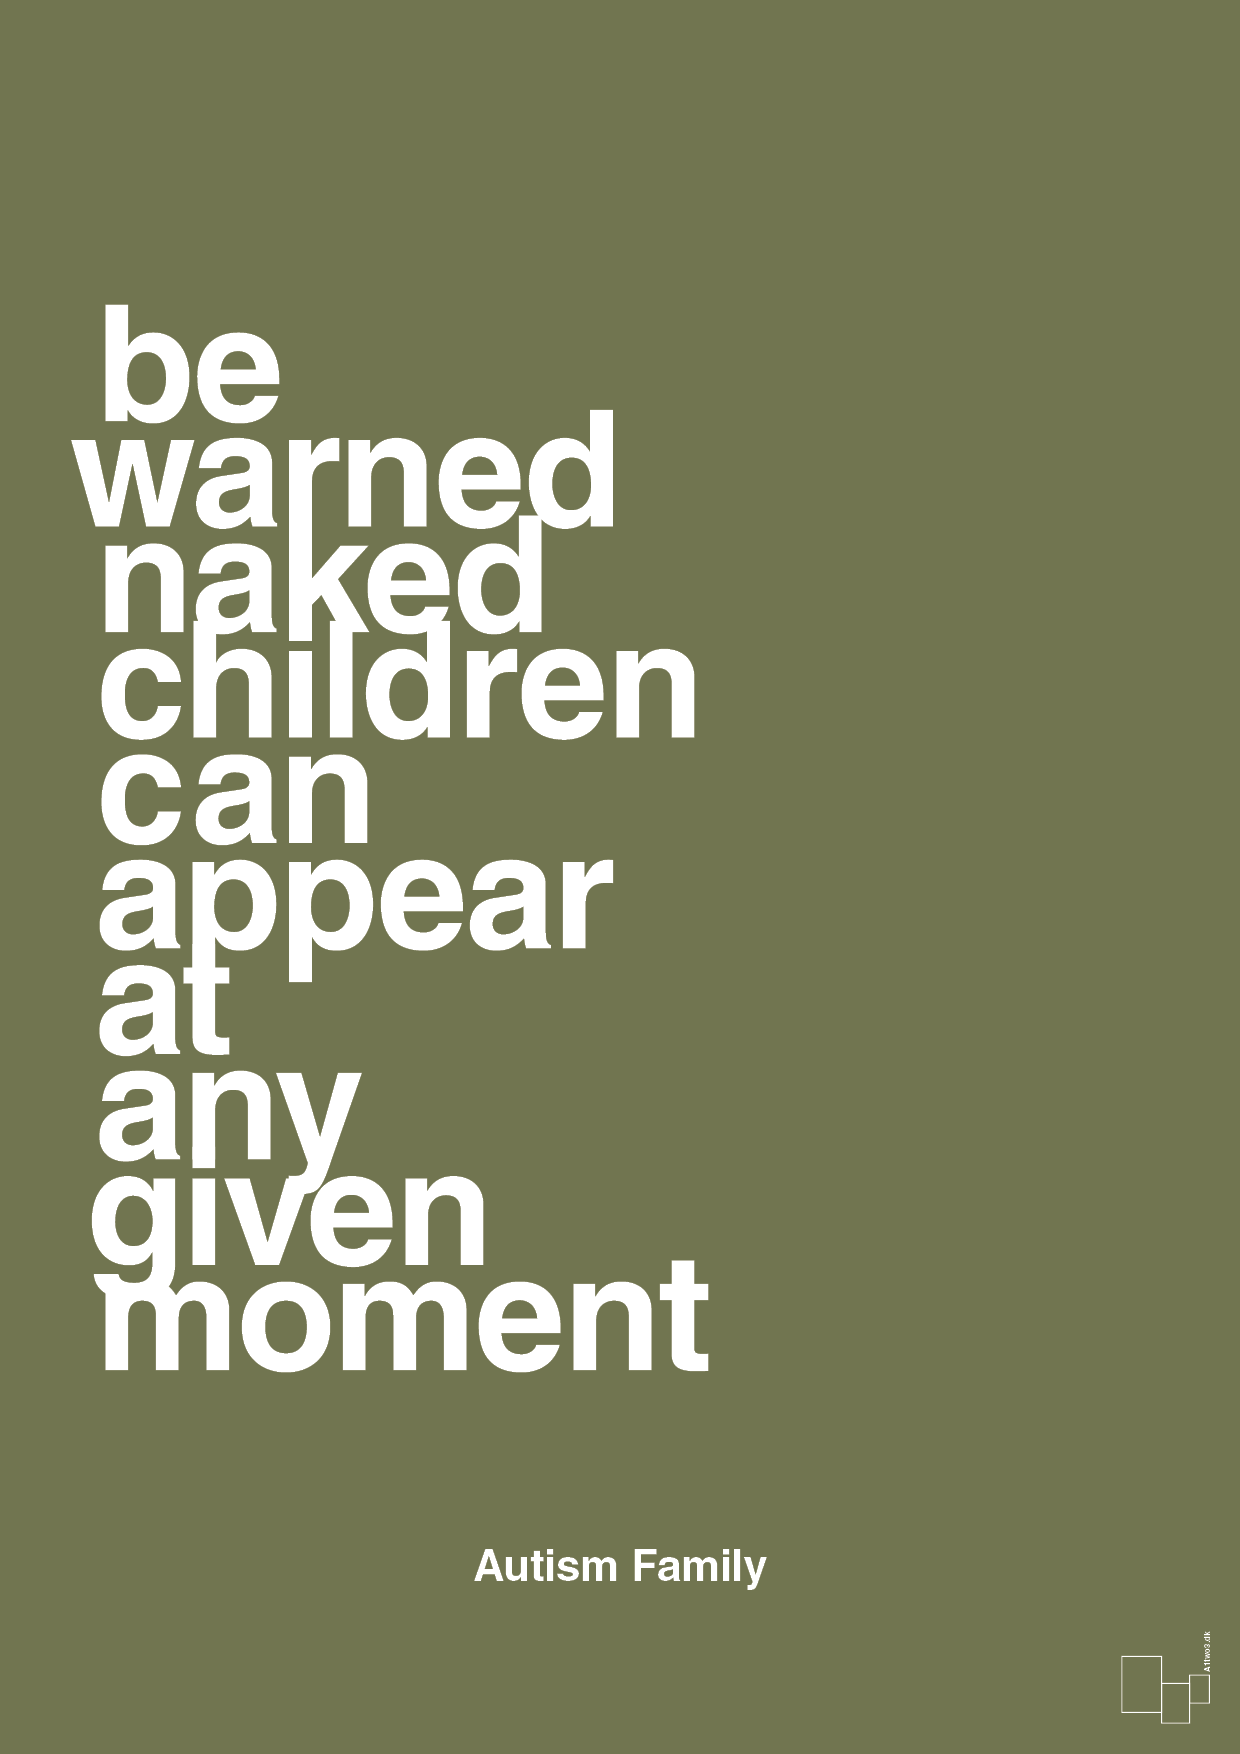 be warned naked children can appear at any given moment - Plakat med Samfund i Secret Meadow